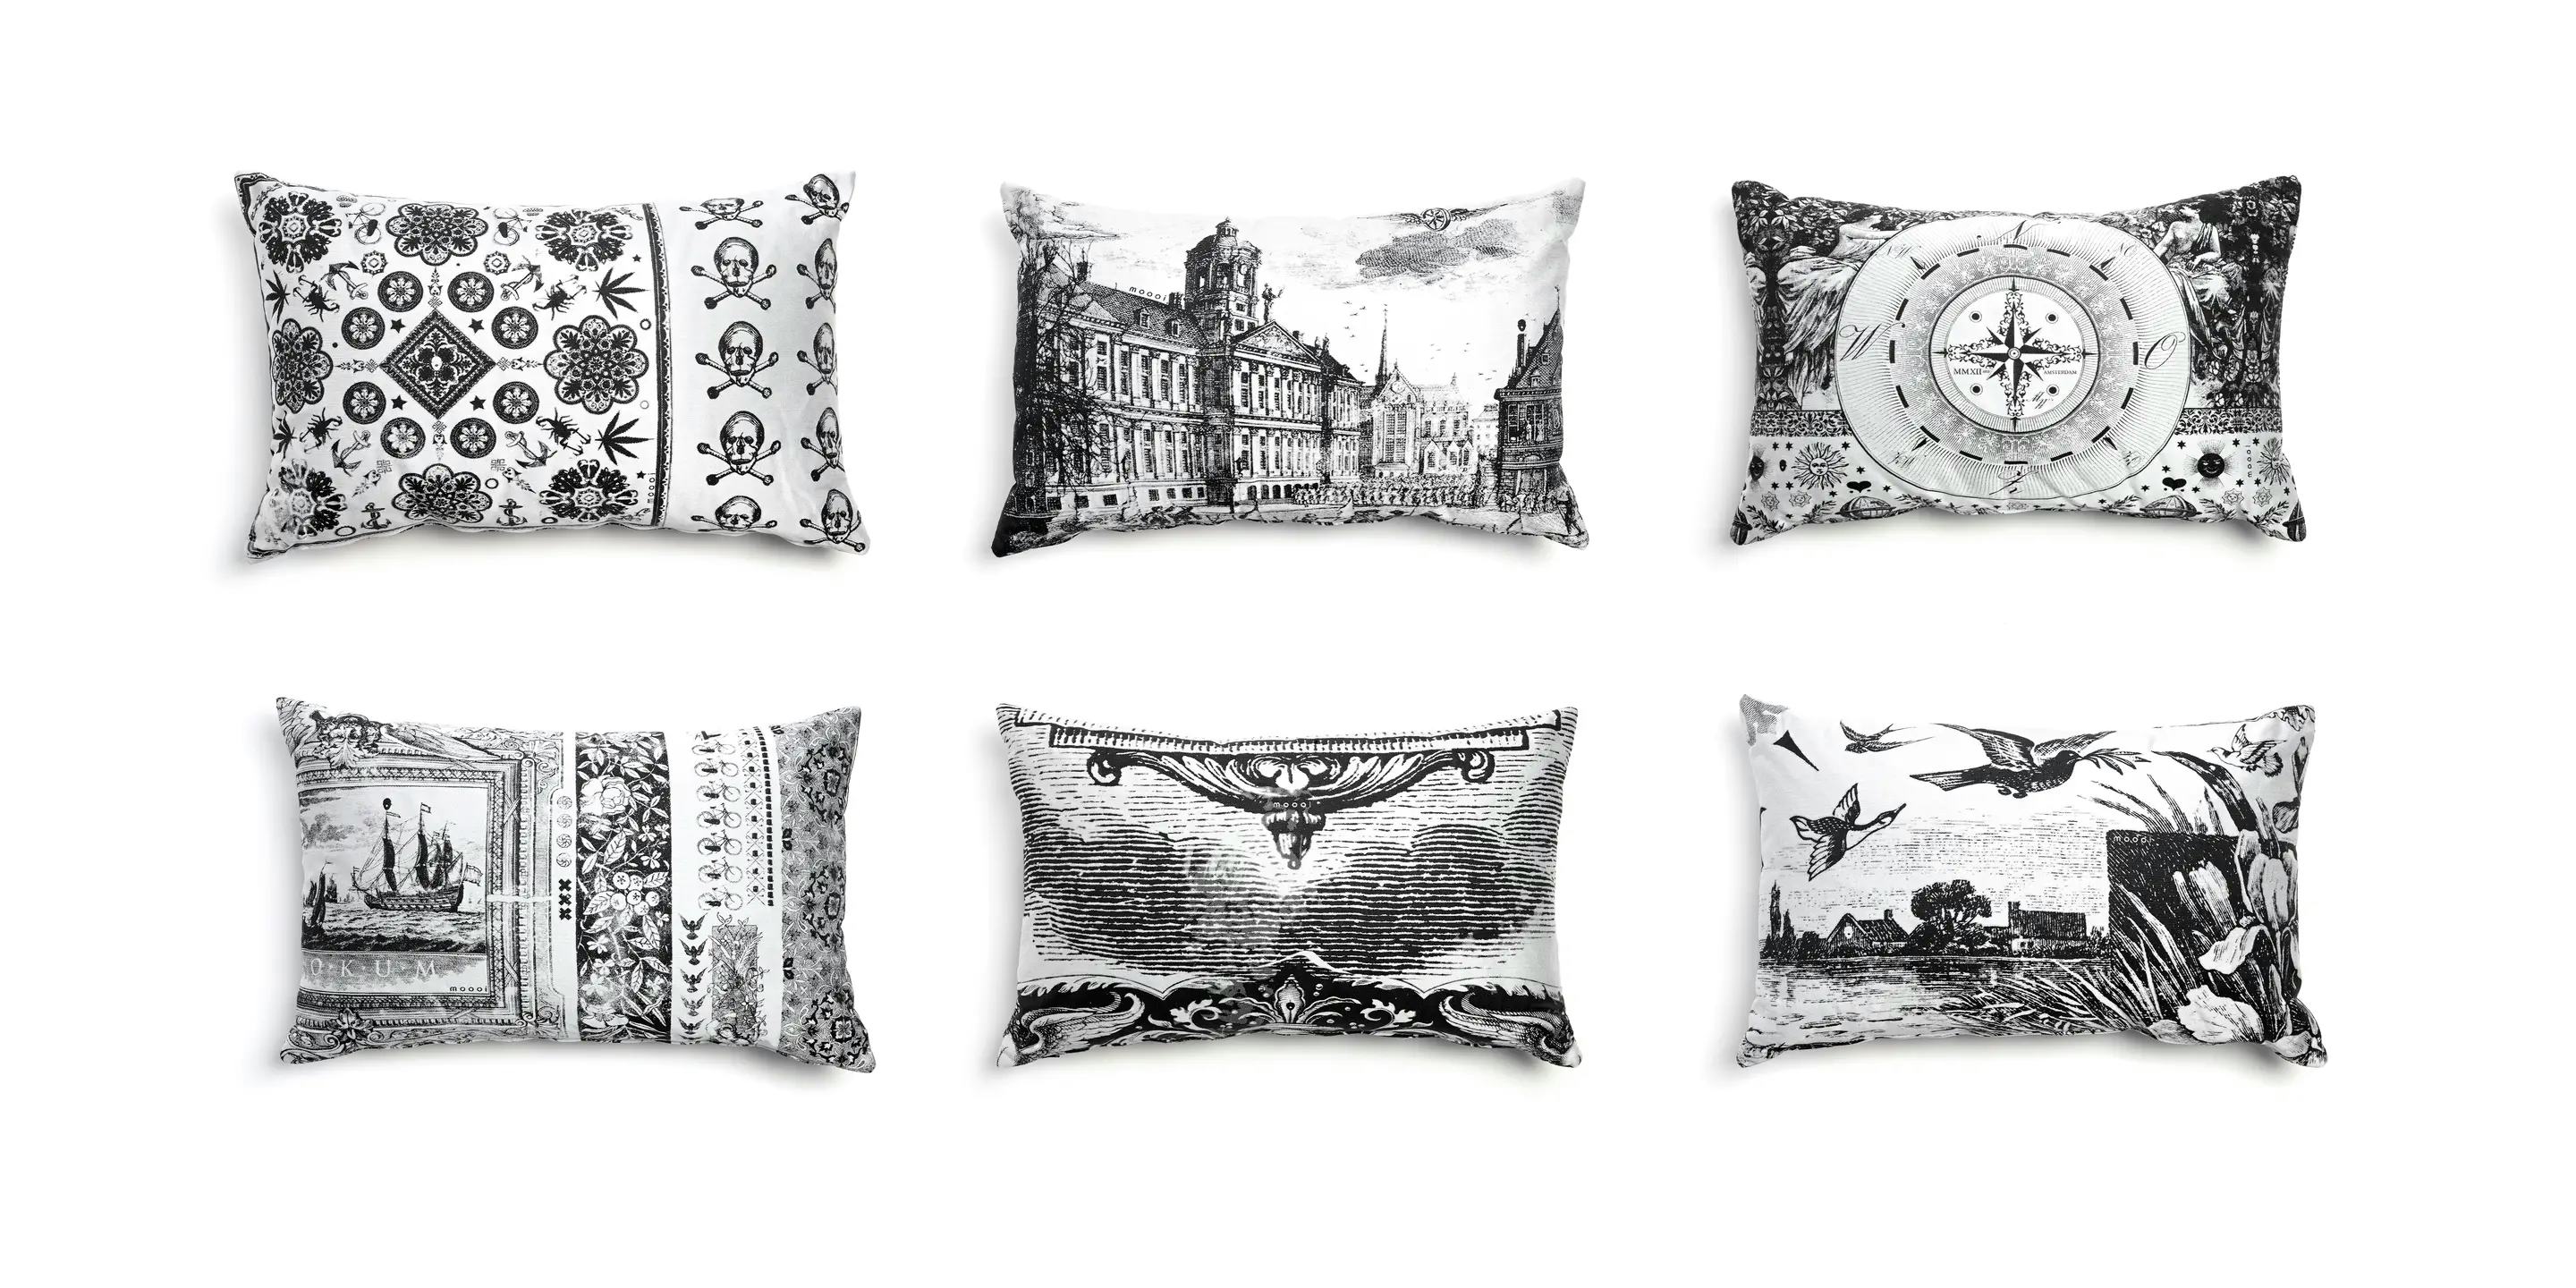 Heritage overview of 6 pillows